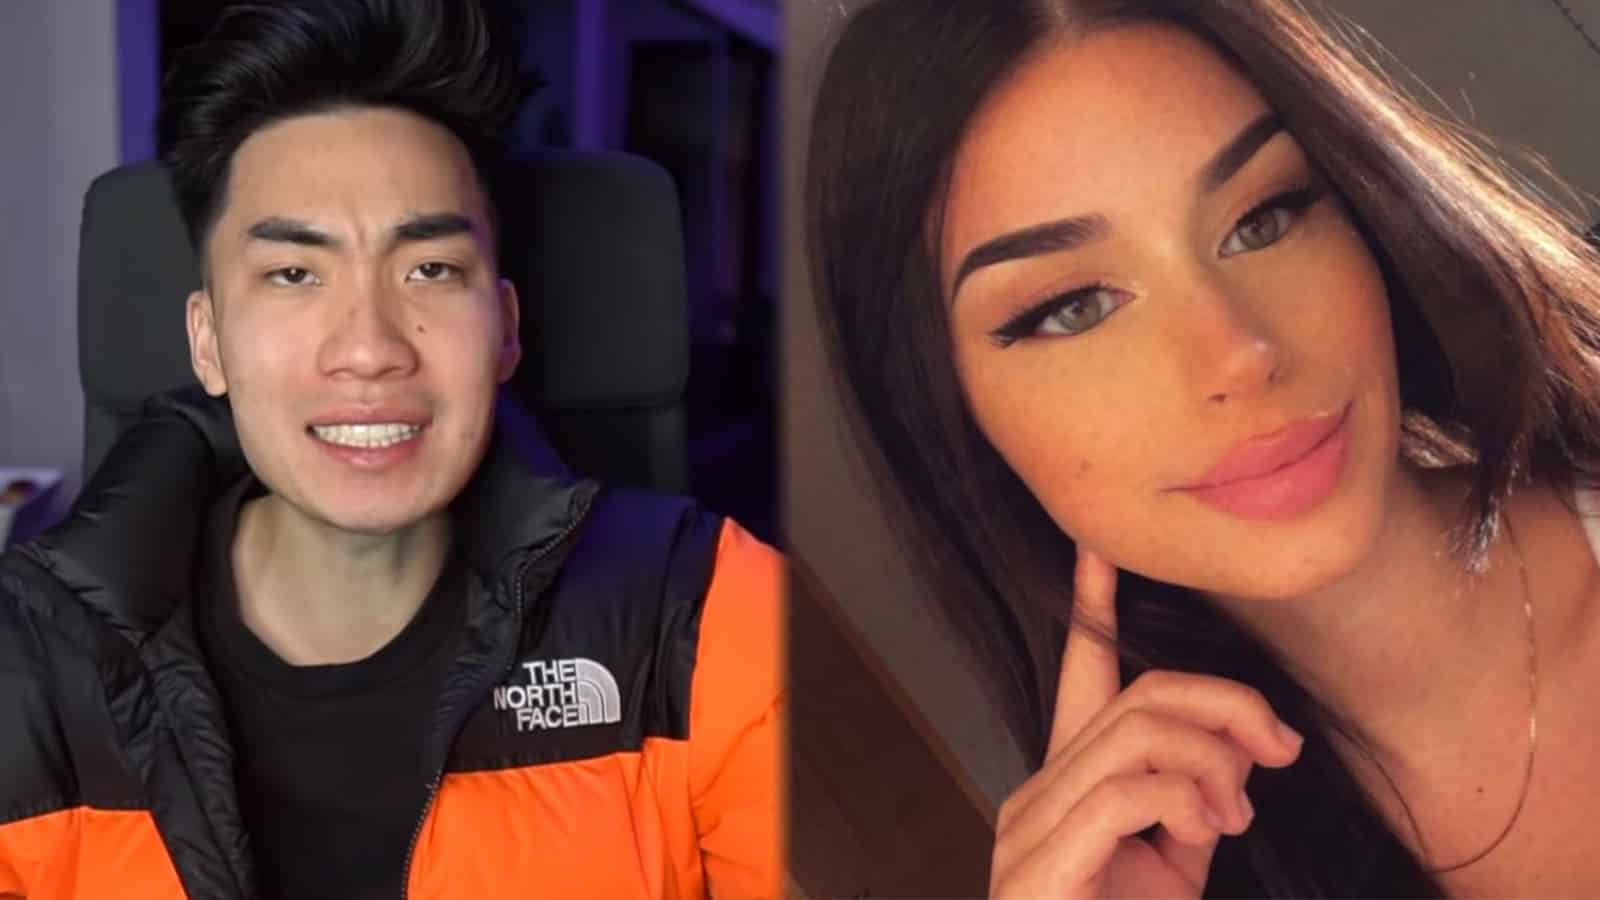 RiceGum asks fans to stop harassing streamer